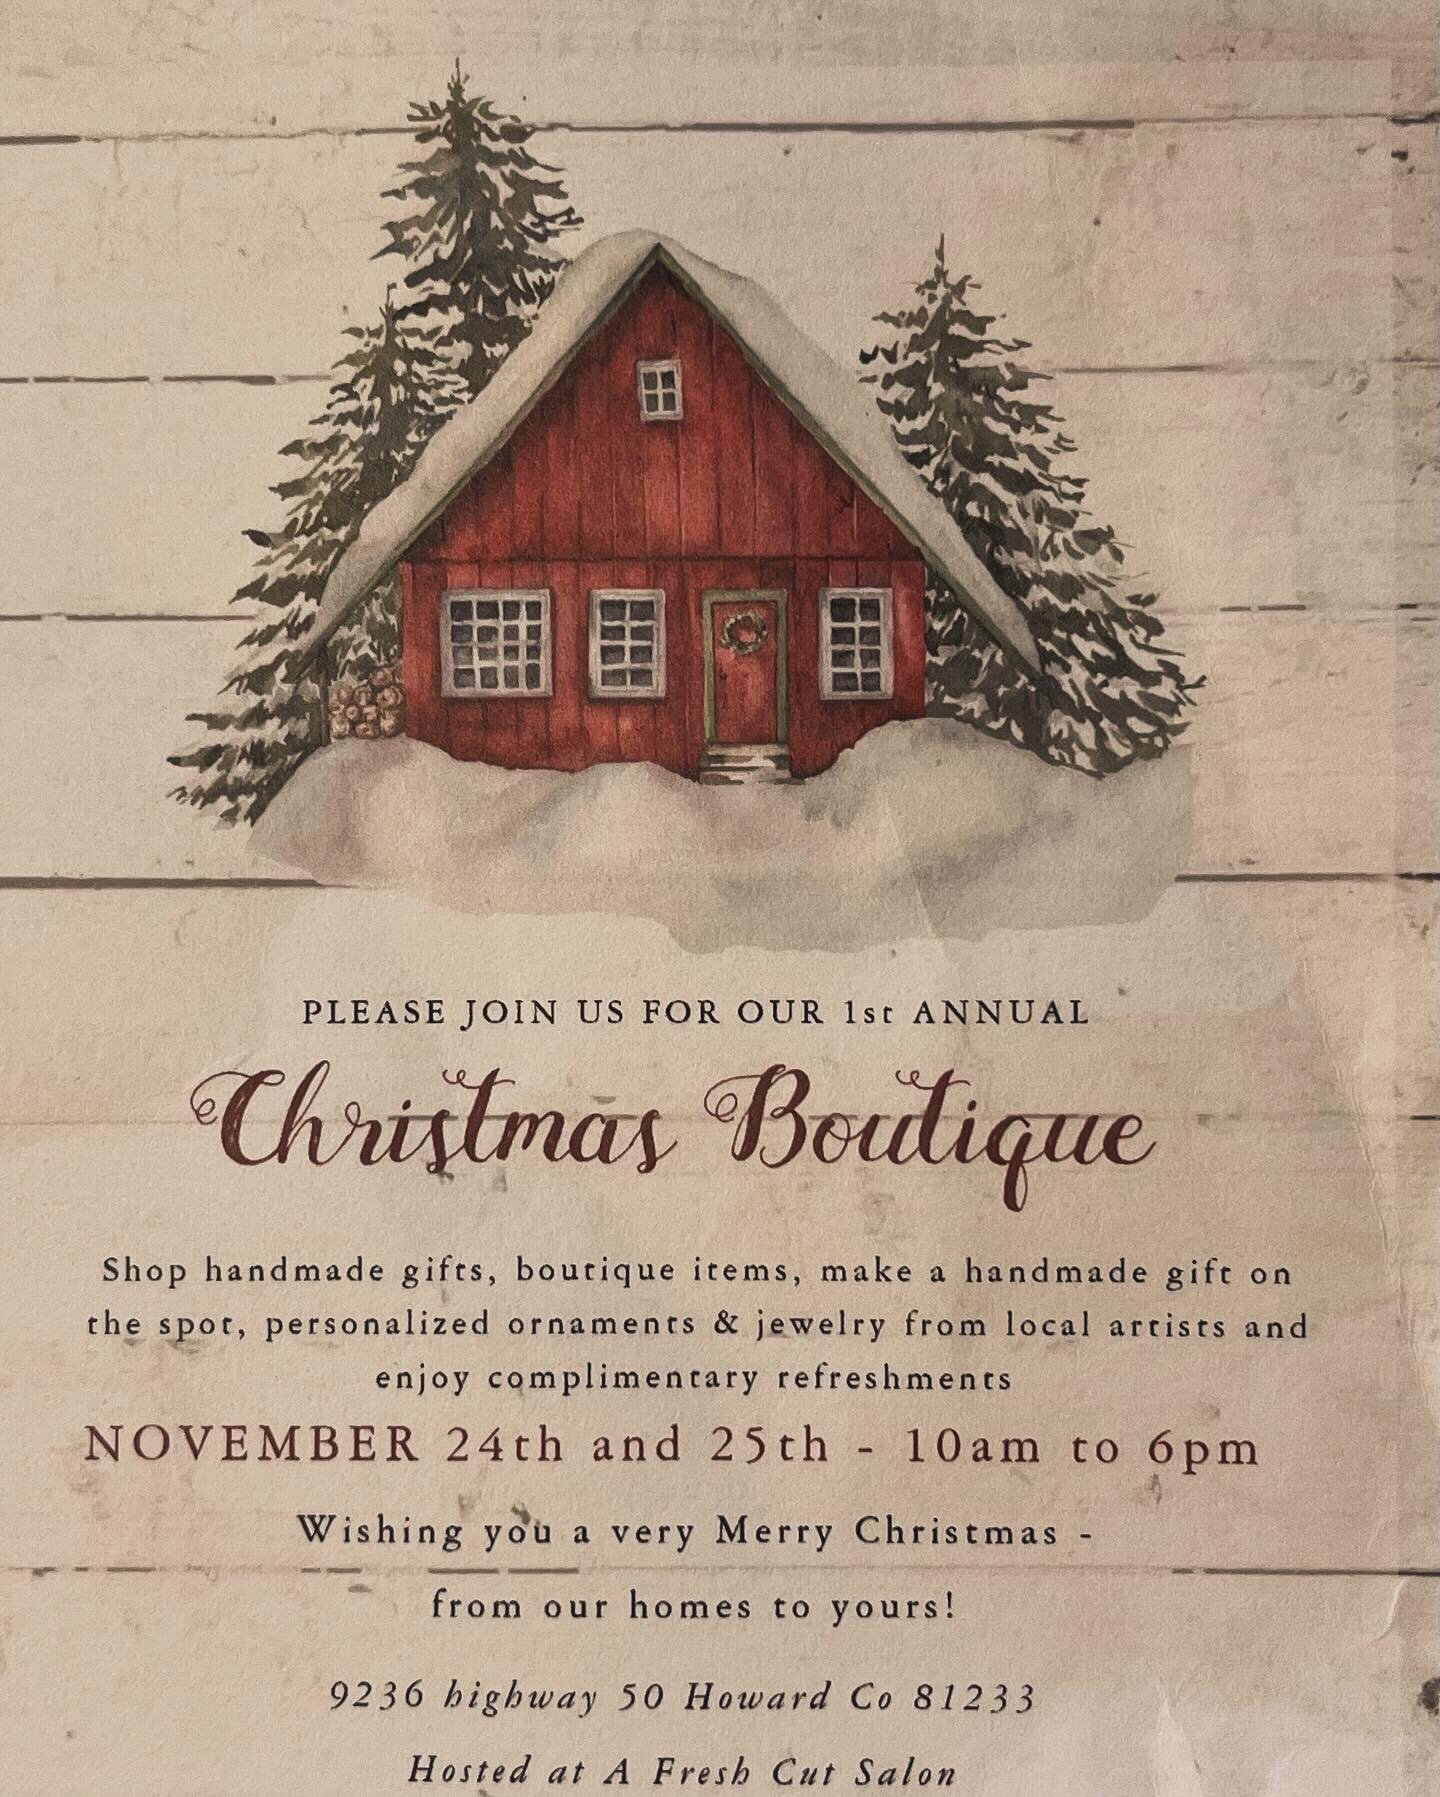 We are delighted to be able to participate in Jessica Wilda&rsquo;s 1st Annual Christmas Boutique this weekend! Hand-made and local. 

Many of the favorites from the Farm Shop, including a limited supply of English lavender bundles, are available.

T